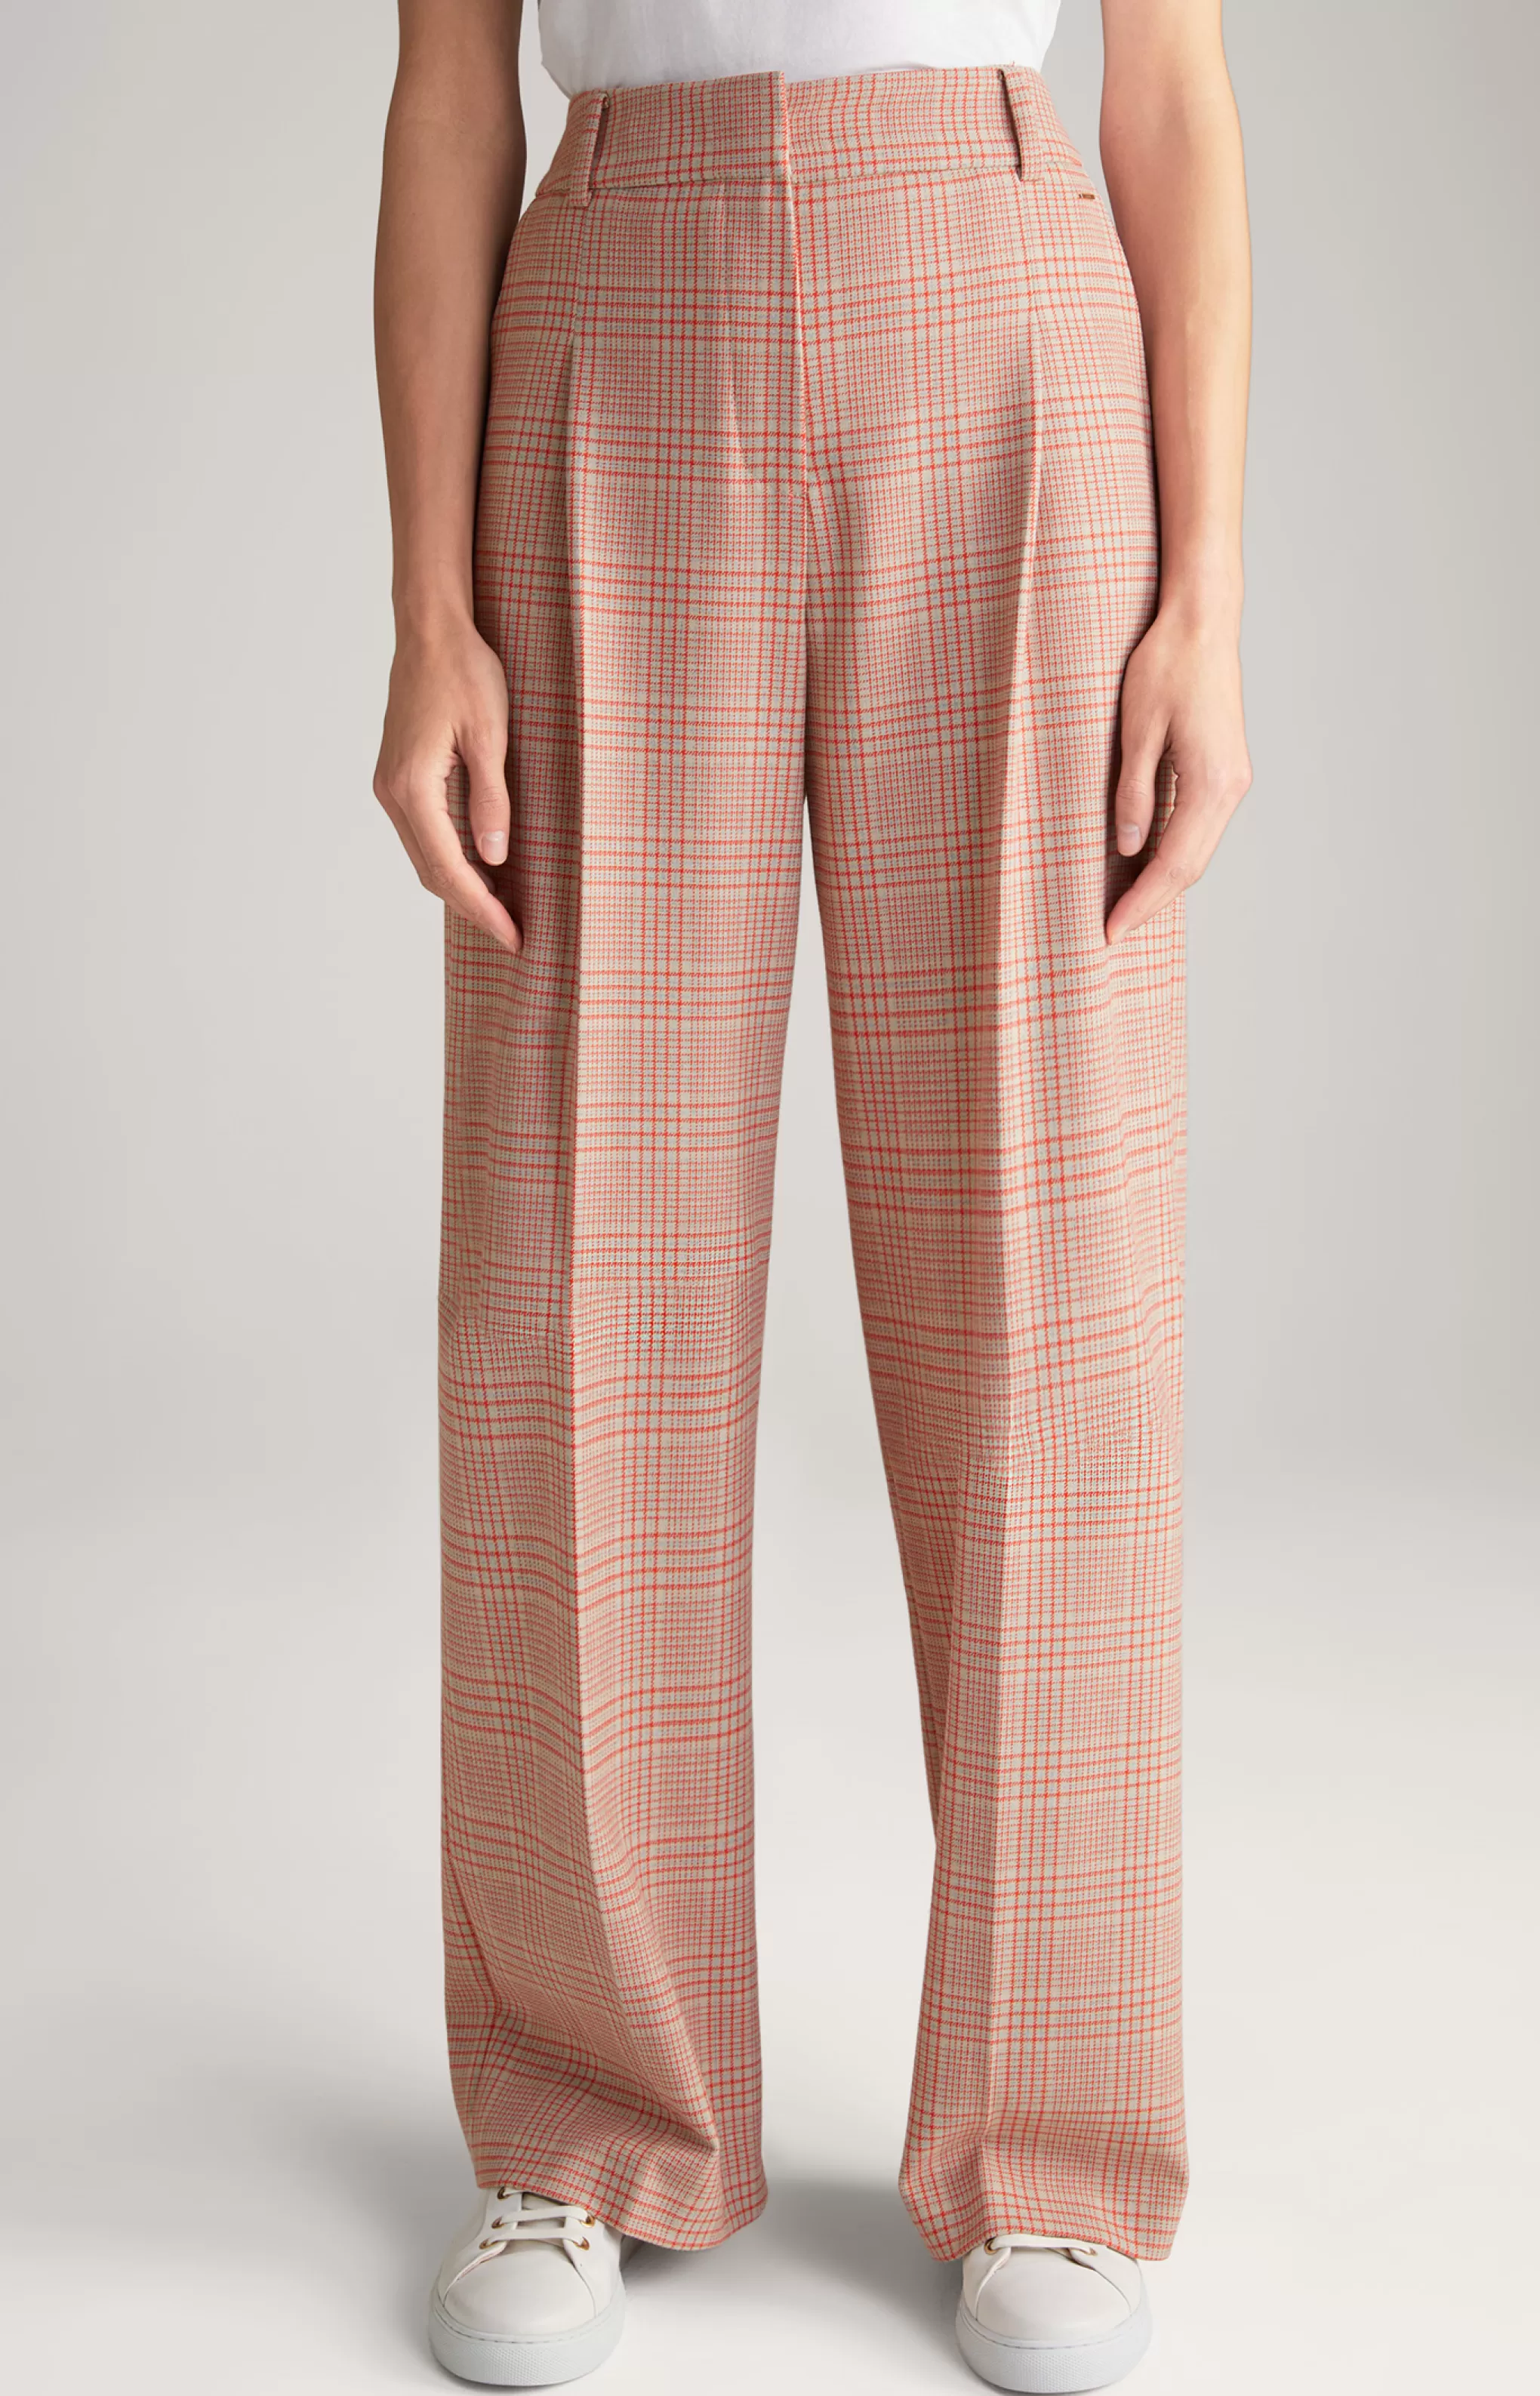 Trousers | Clothing*JOOP Trousers | Clothing Twill trousers in Beige/Red Check